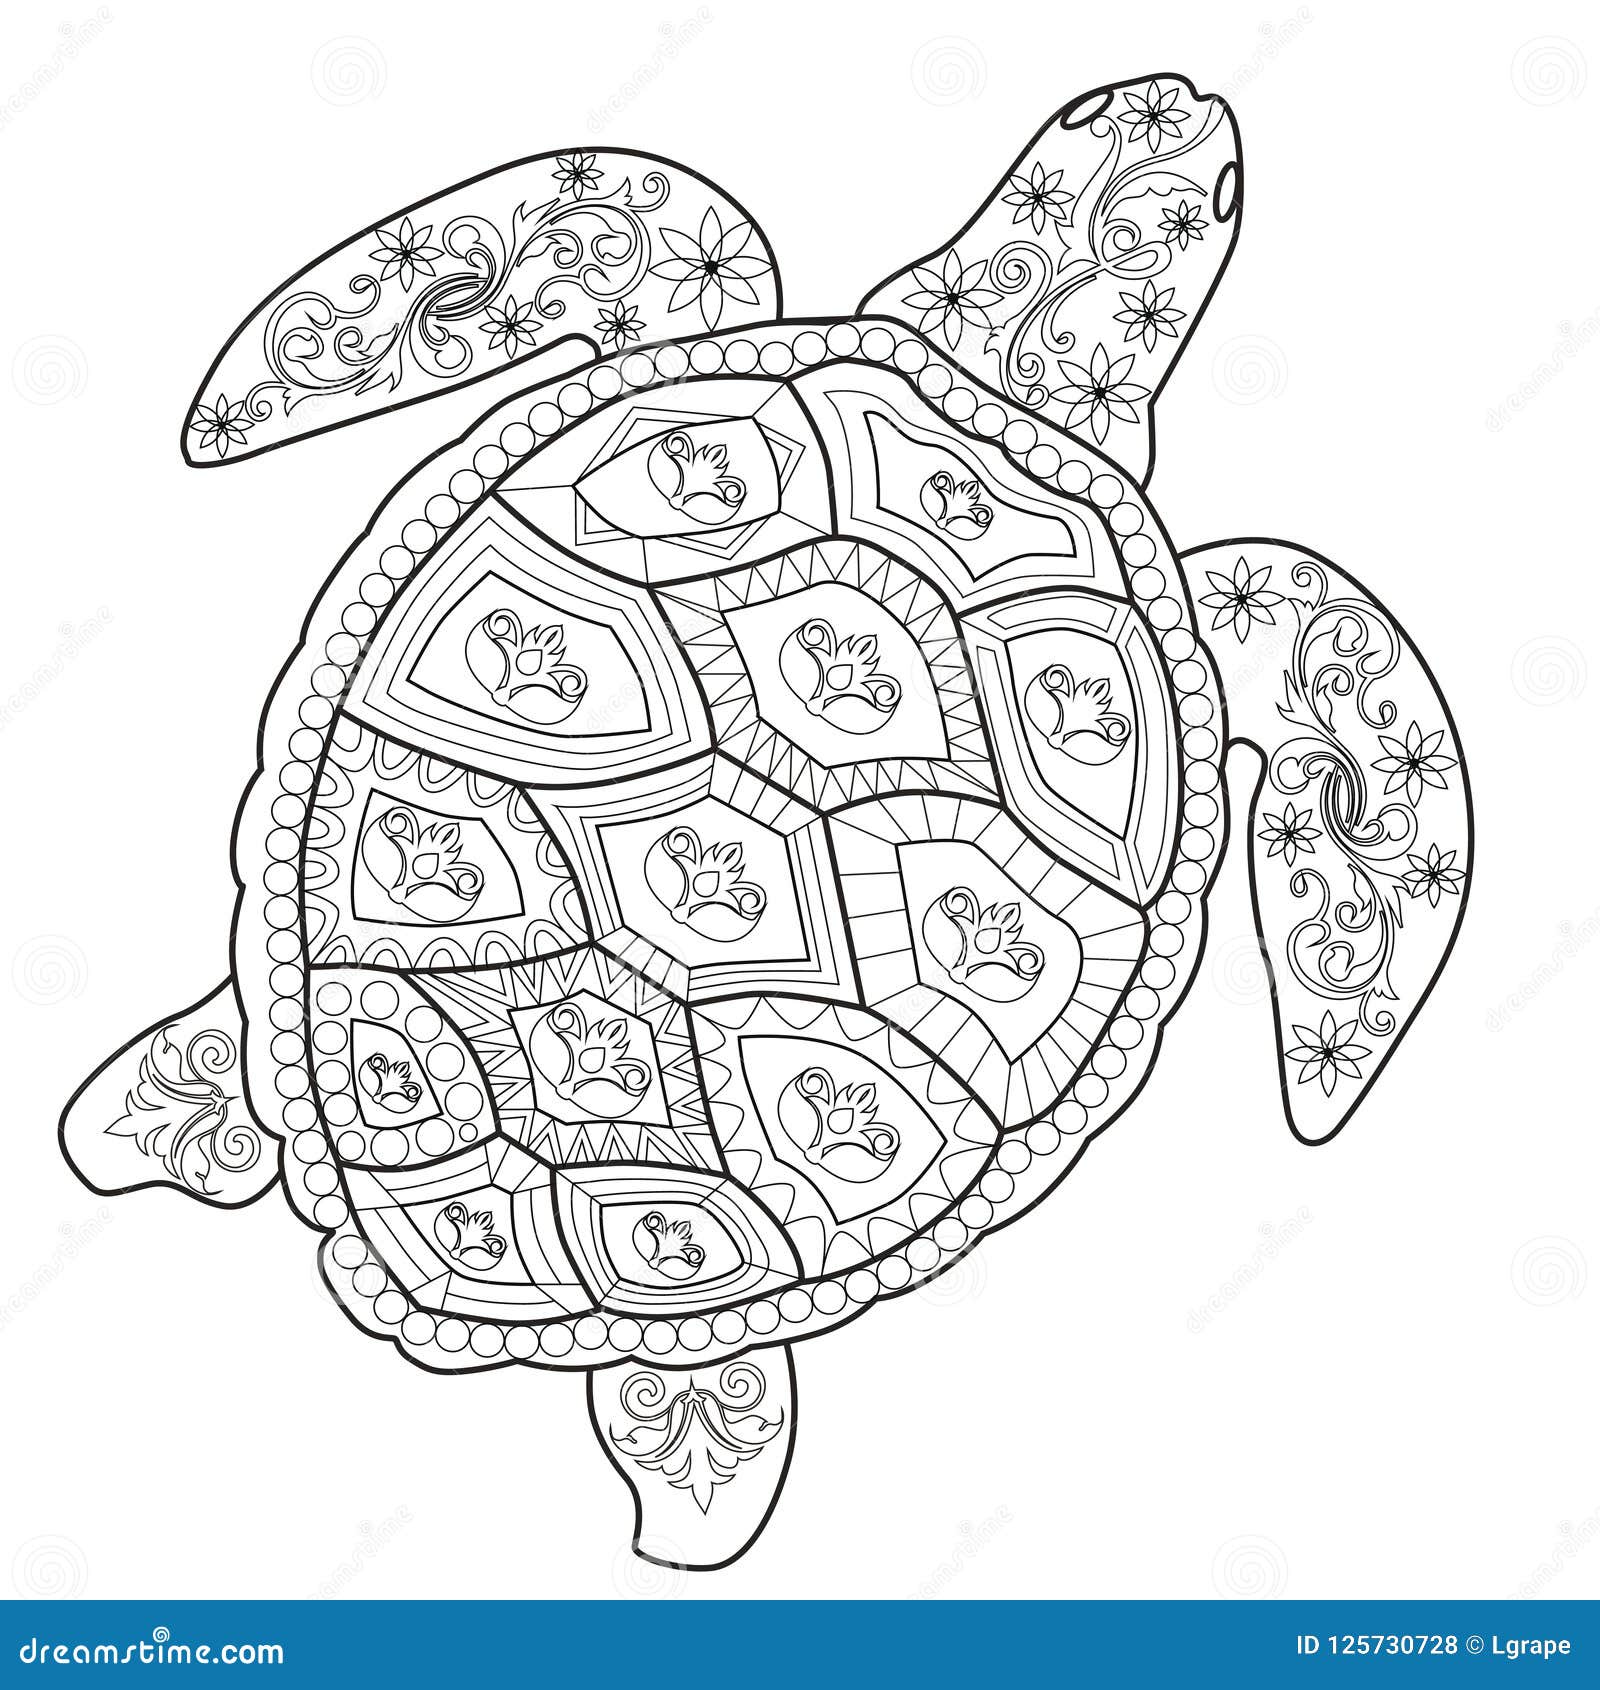 Turtle Coloring Book For Adults: Stress Relieving Adult Coloring Book for  Men, Women, Teenagers, & Older Kids, Advanced Coloring Pages, Detailed  Zendo (Paperback)